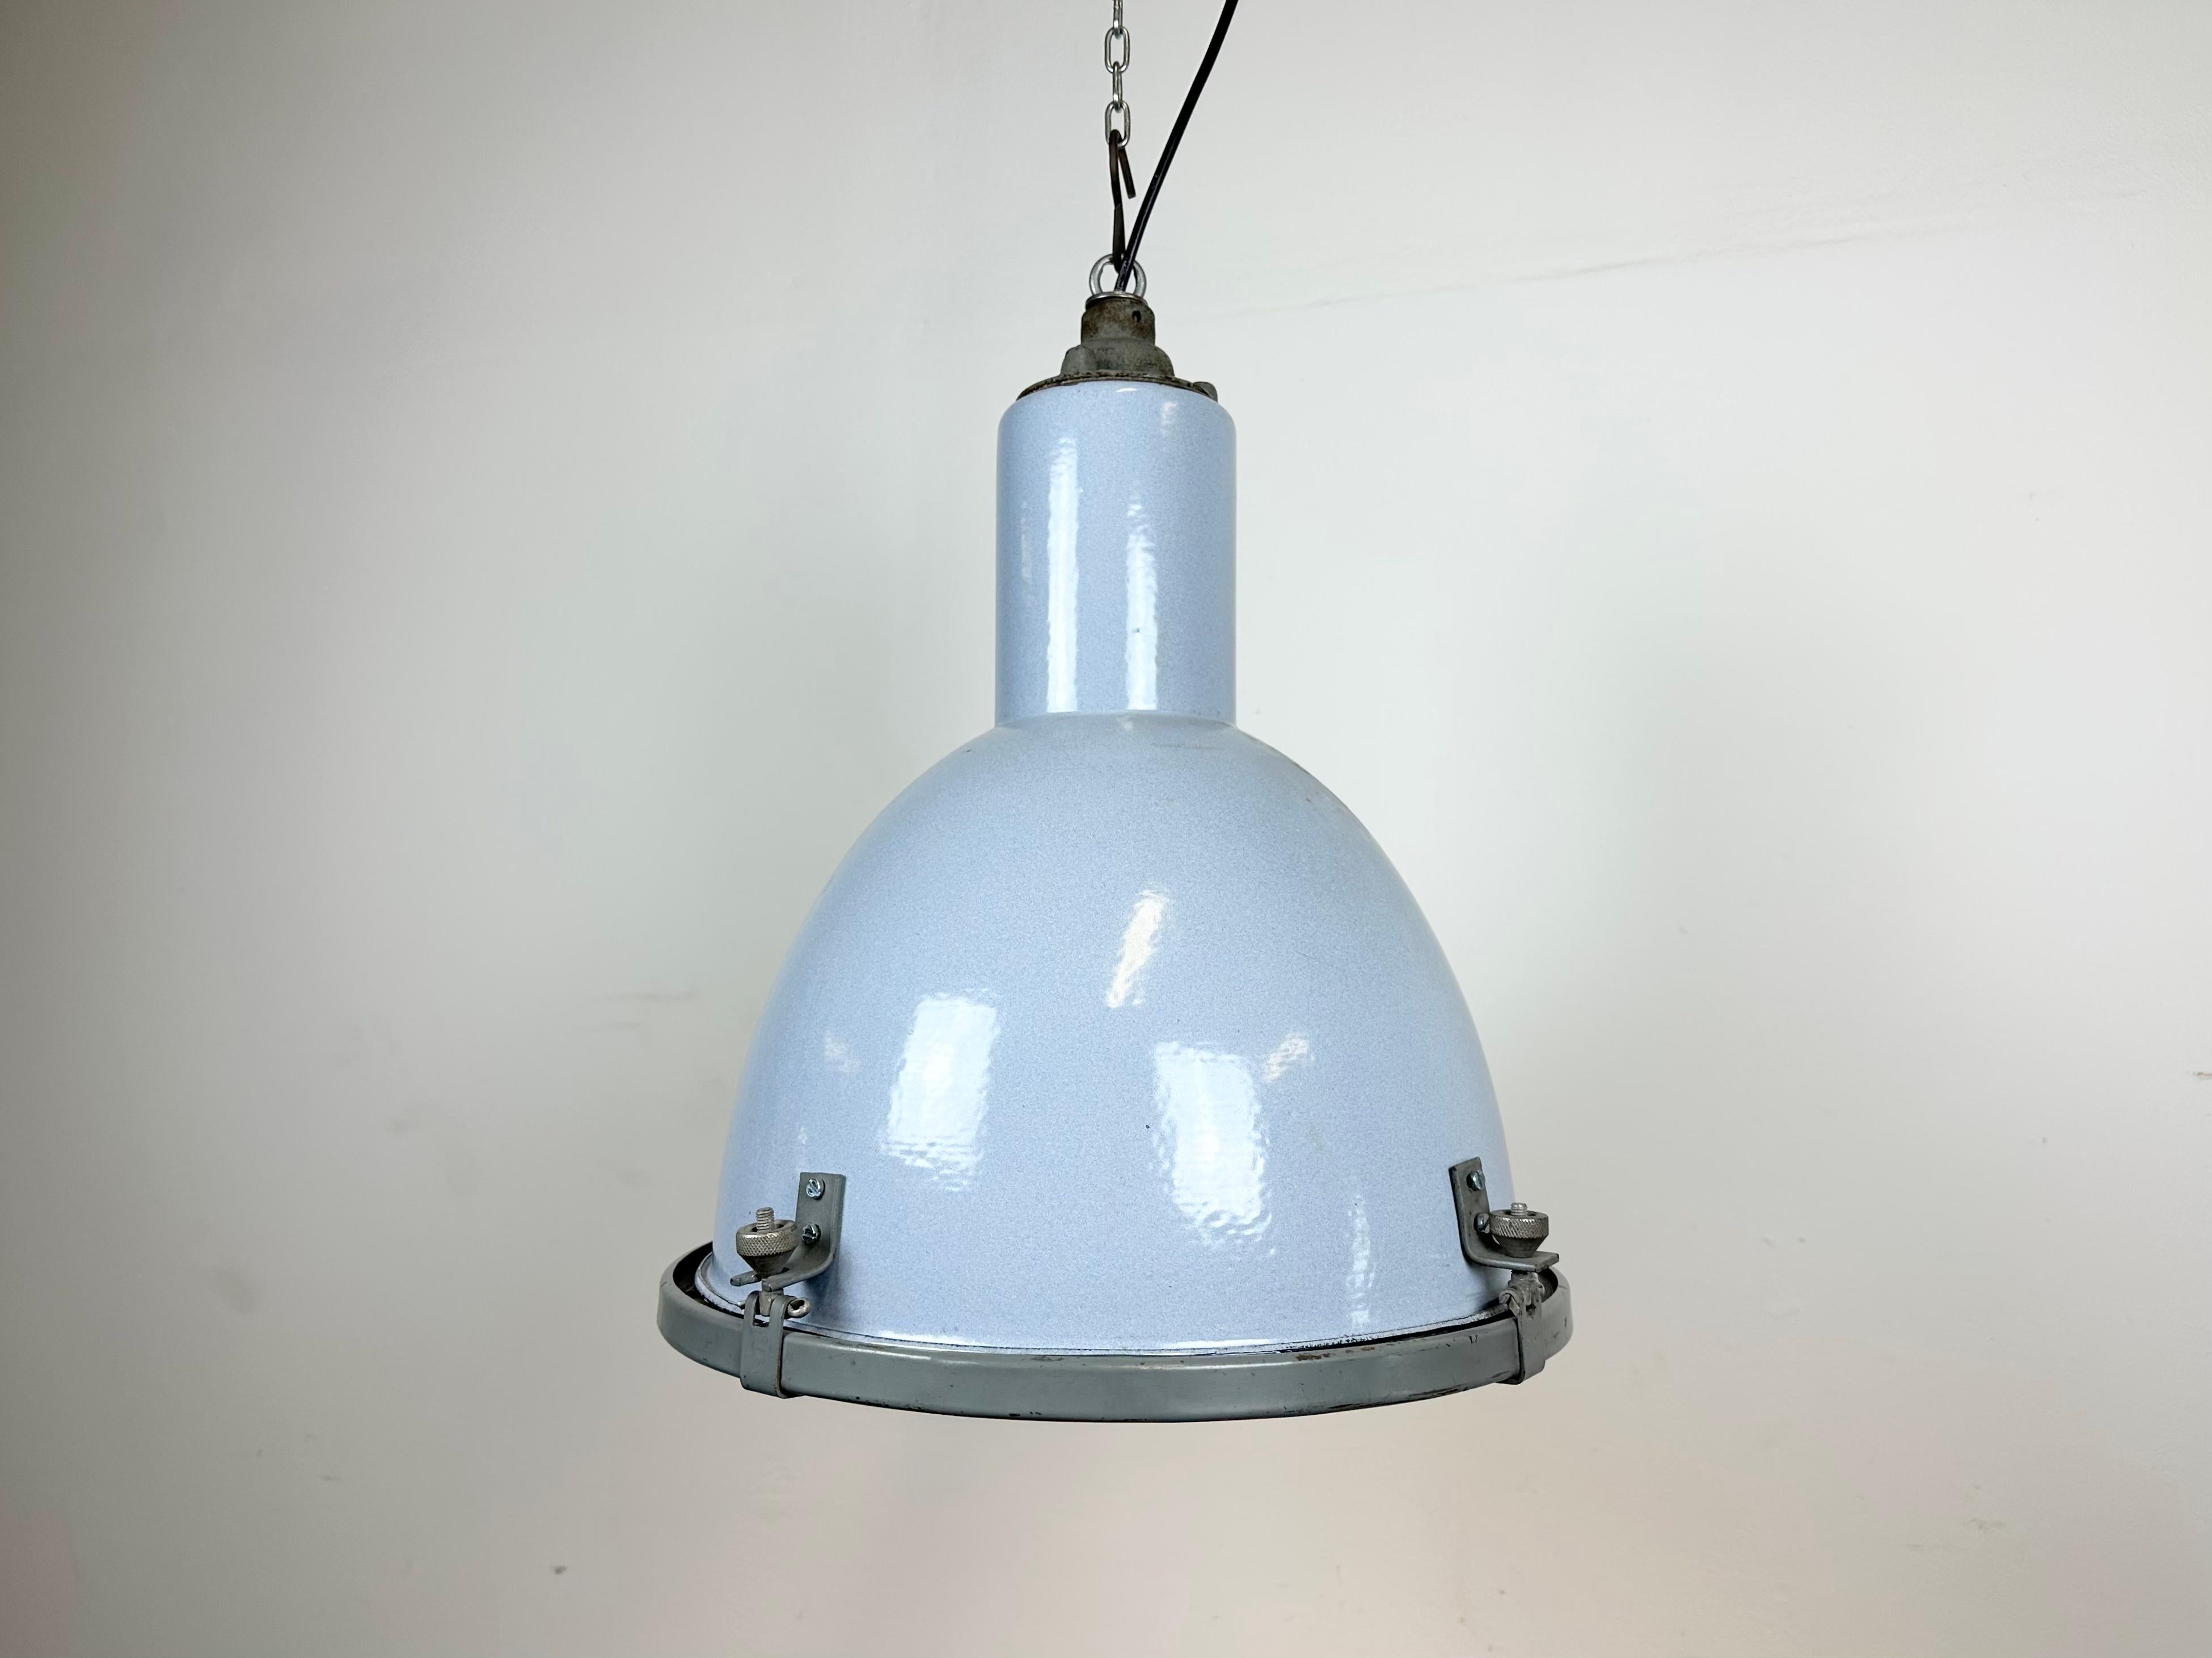 Vintage Industrial light in Bauhaus style made in former Czechoslovakia during the 1950s.It features a light grey ( light blue ) enamel body with white enamel interior, a cast iron top and clear glass cover. New porcelain socket requires E27/E26